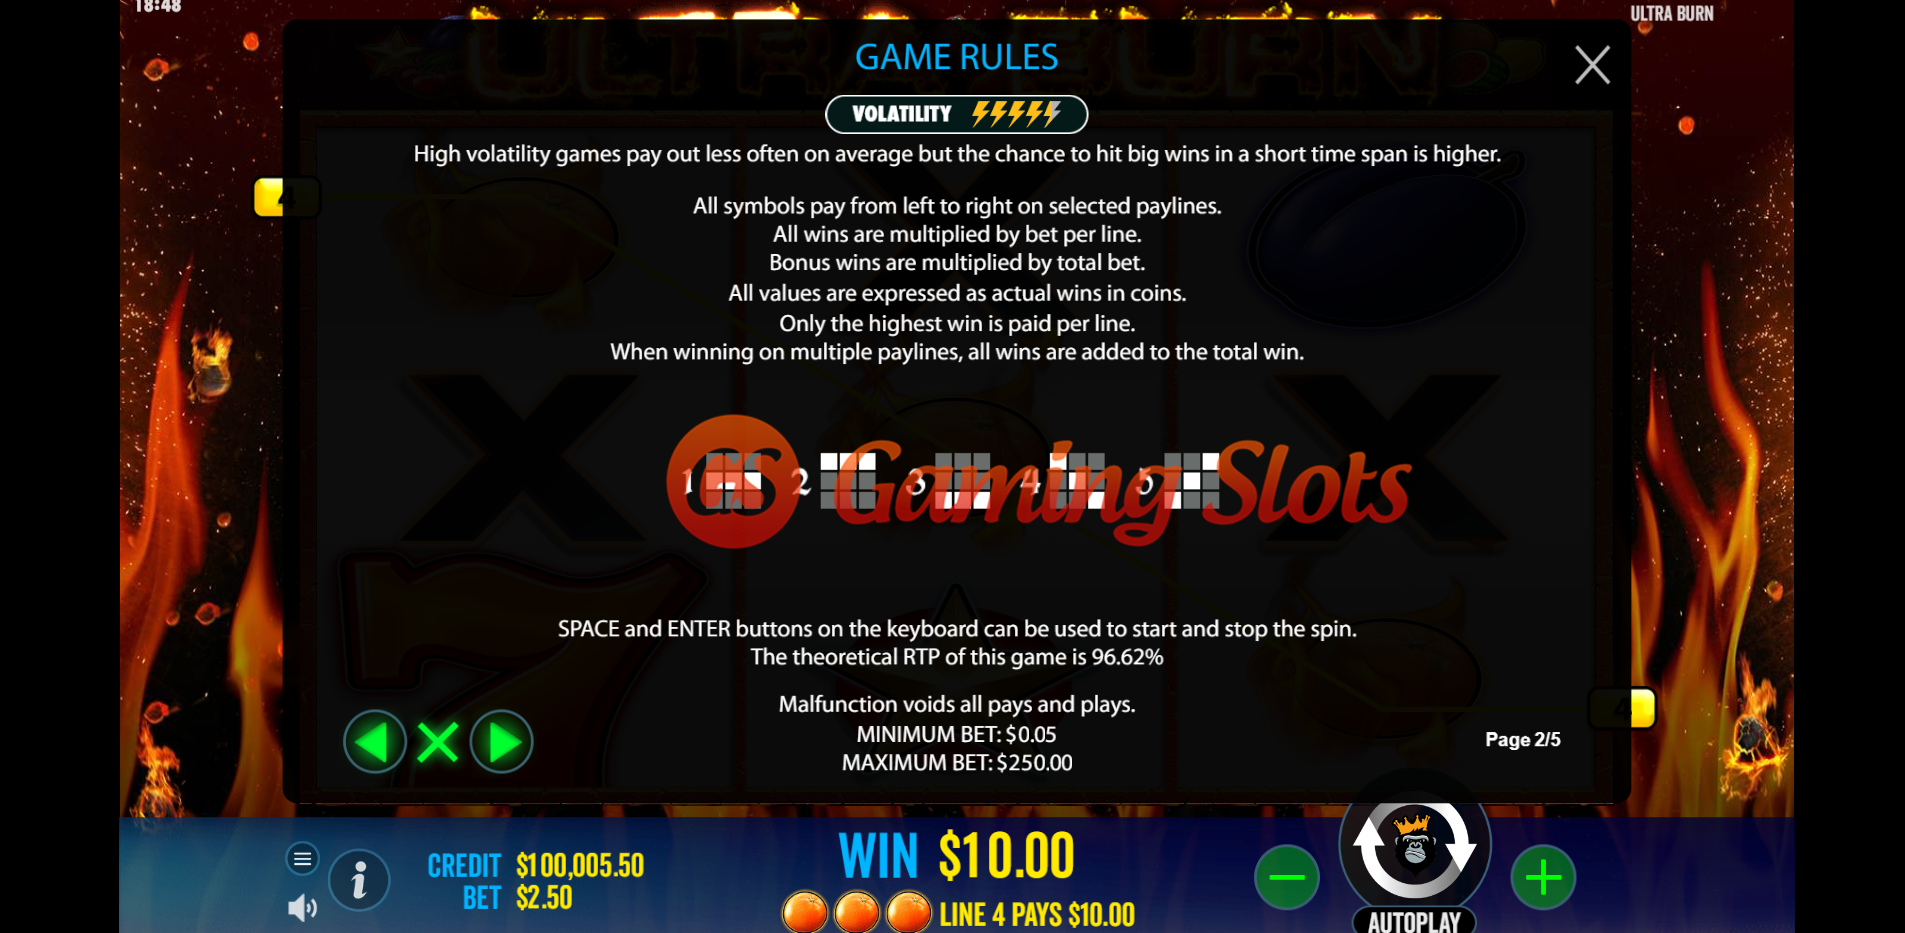 Game Rules for Ultra Burn slot by Pragmatic Play